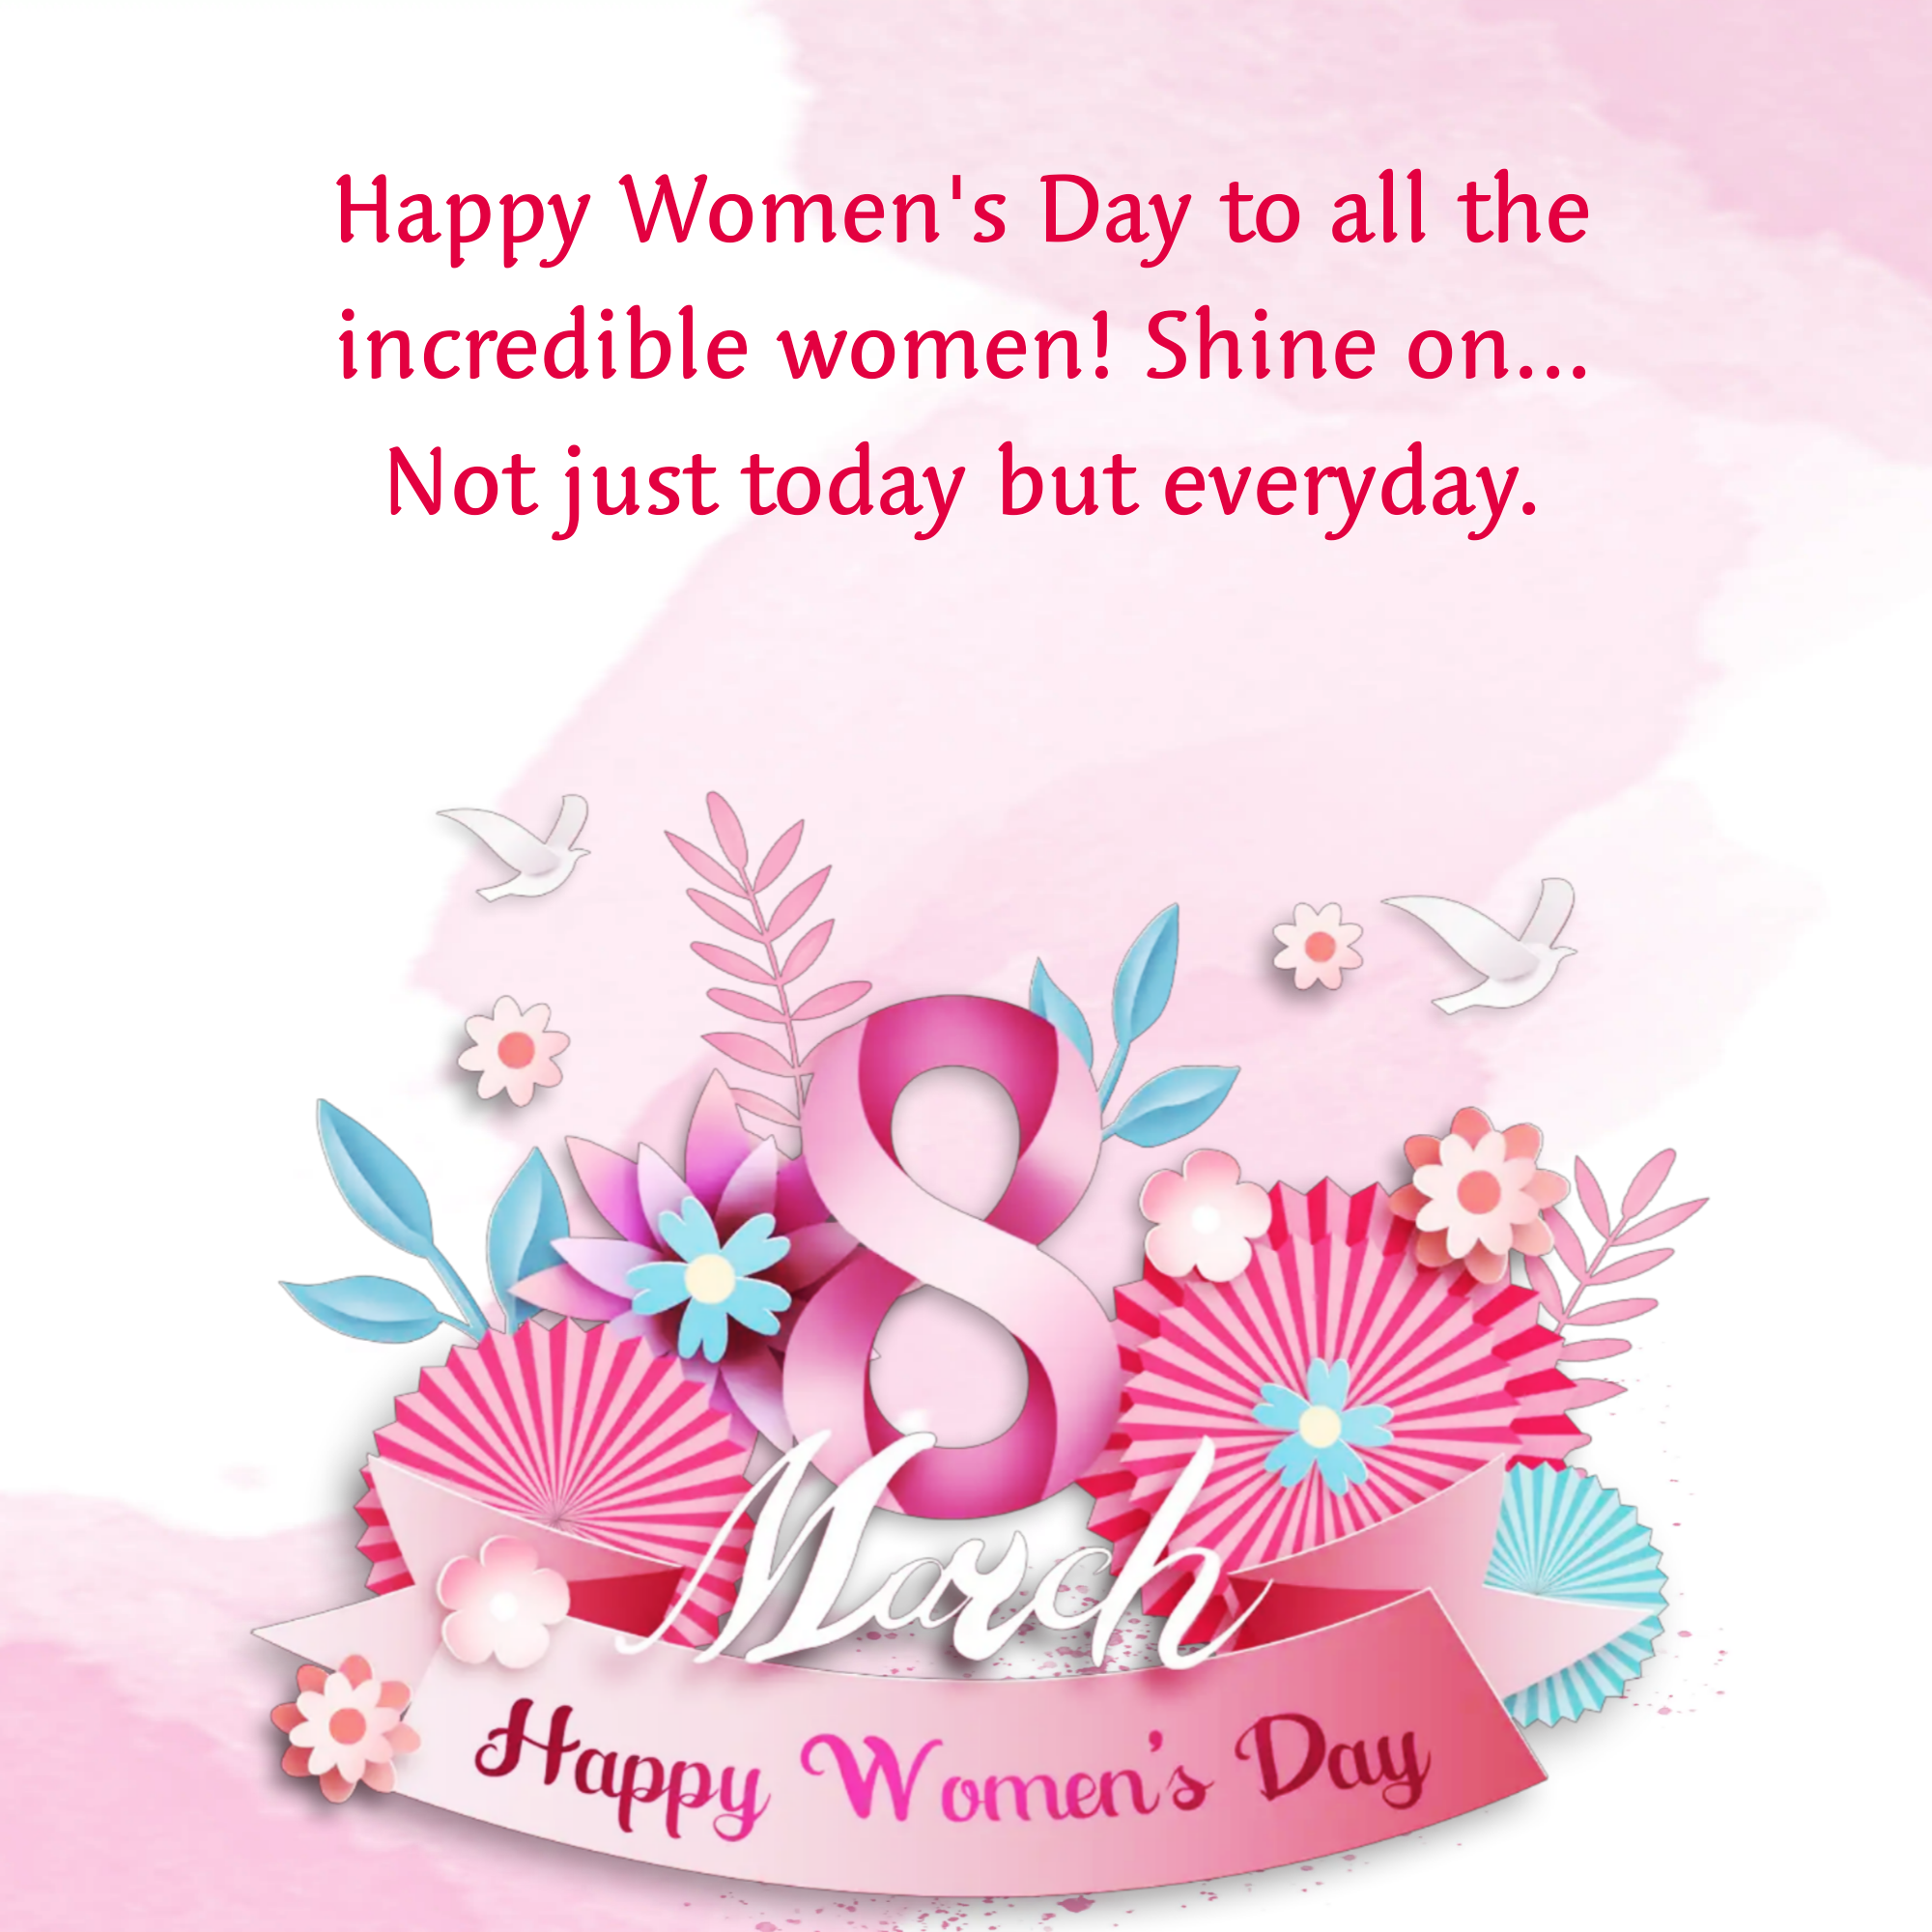 Happy Women's Day to all the incredible women